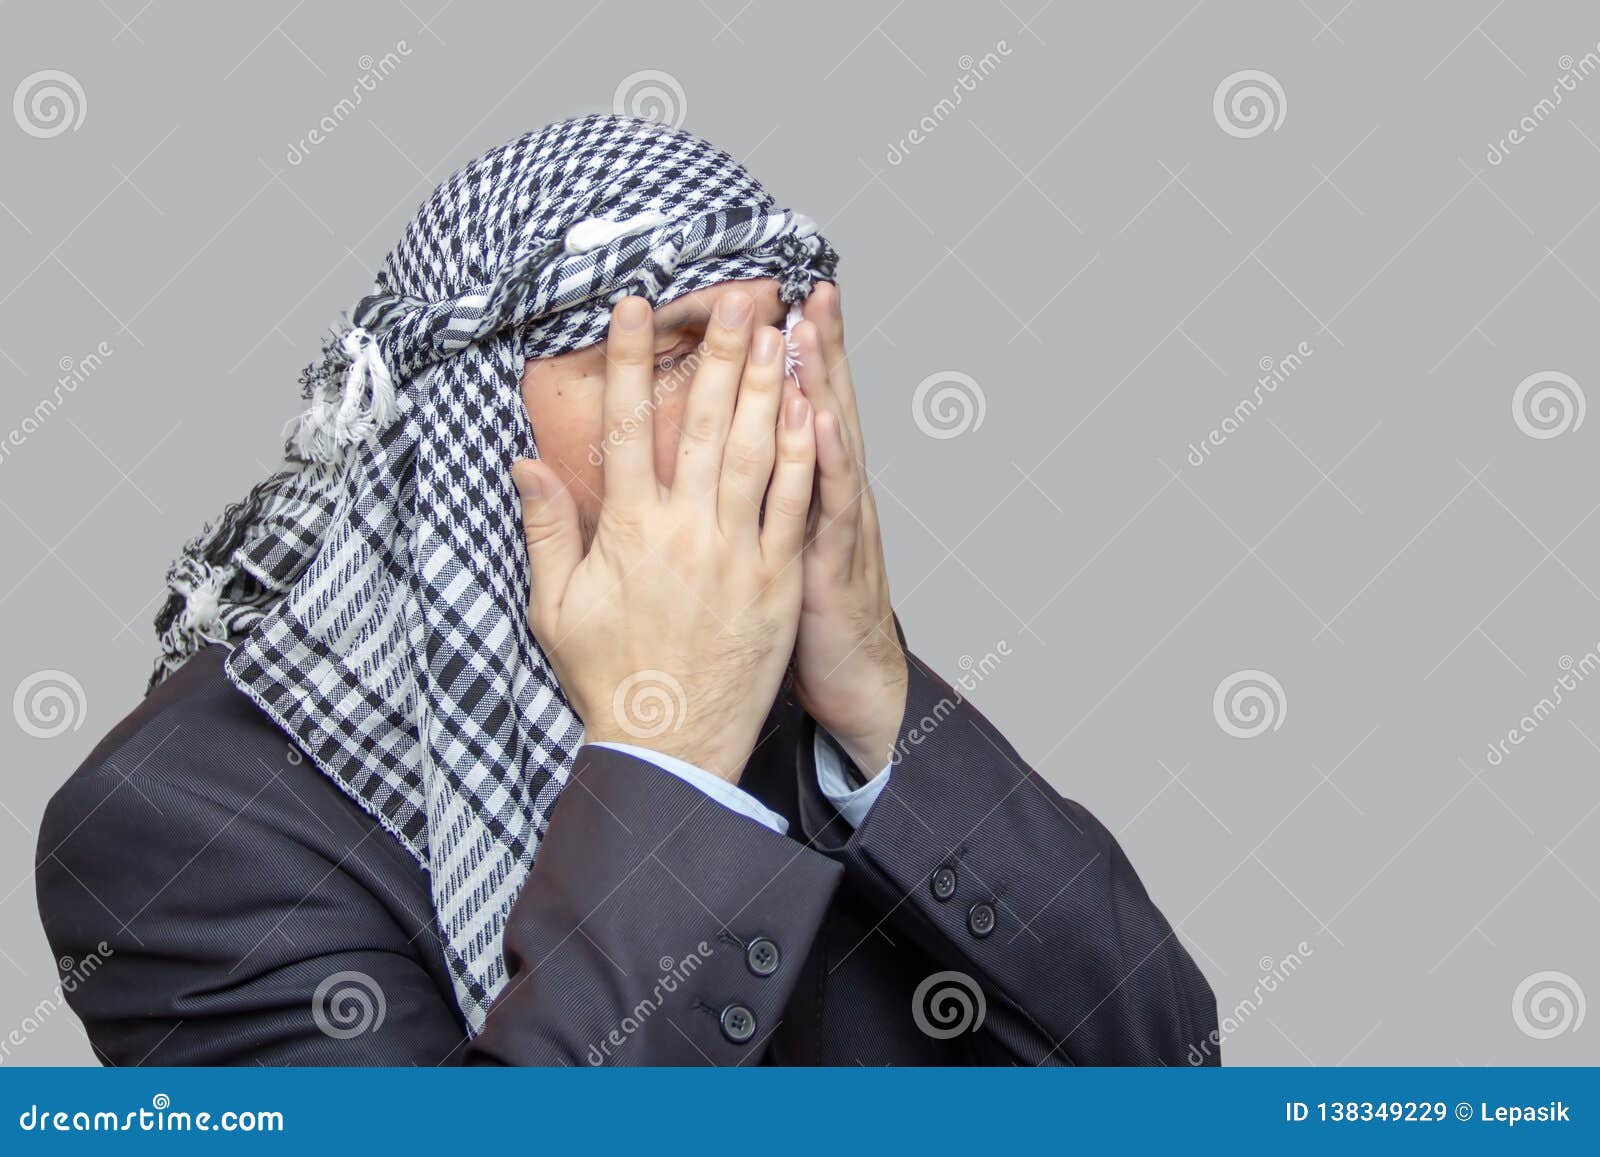 A Man in a Palestinian Scarf, the Eastern Way of Praying in